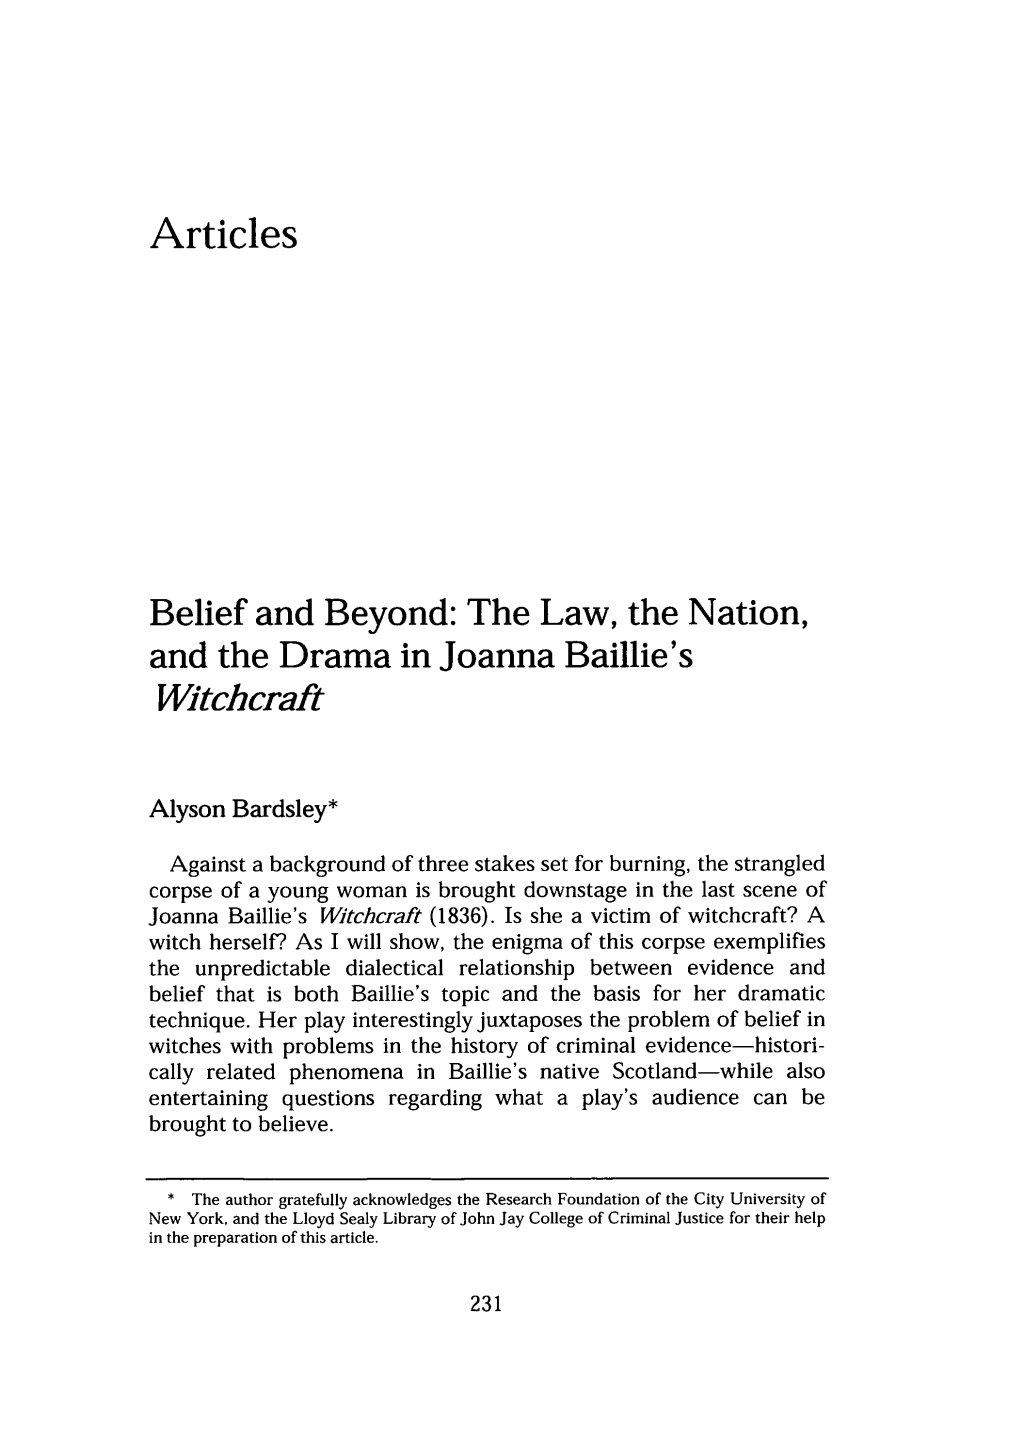 The Law, the Nation, and the Drama in Joanna Baillie's Witchcraft